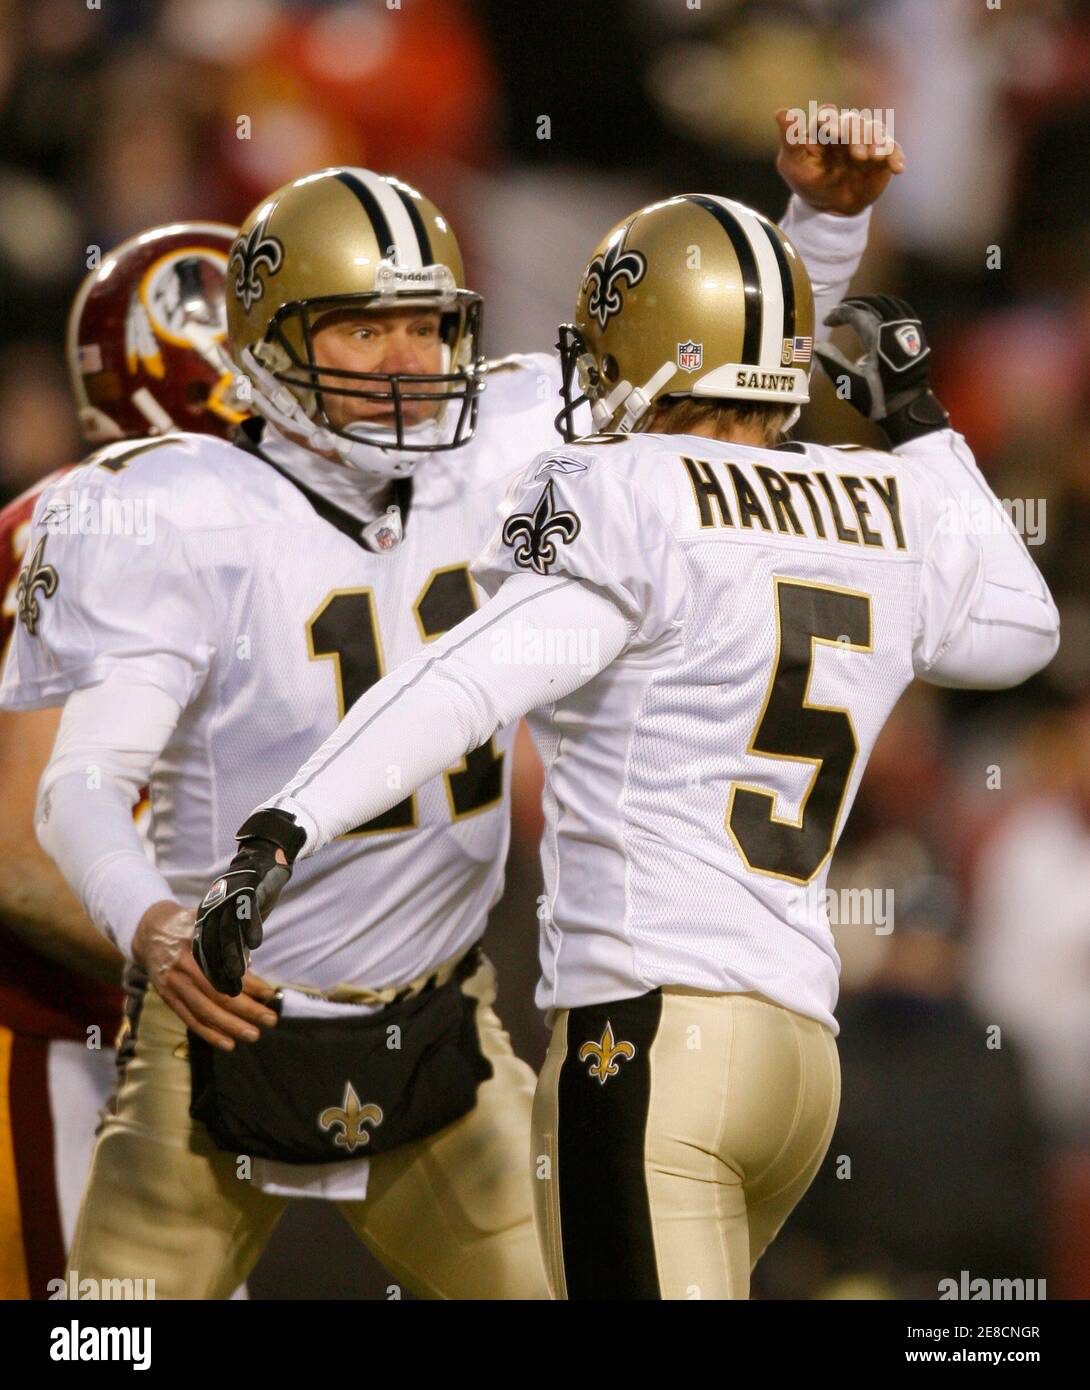 New Orleans Saints holder Mark Brunell (L) celebrates with Saints' kicker Garrett Hartley (5) after Hartley kicked the game-winning field goal against the Washington Redskins in overtime of their NFL football game in Landover, Maryland December 6, 2009.    REUTERS/Gary Cameron               (UNITED STATES SPORT FOOTBALL) Stock Photo